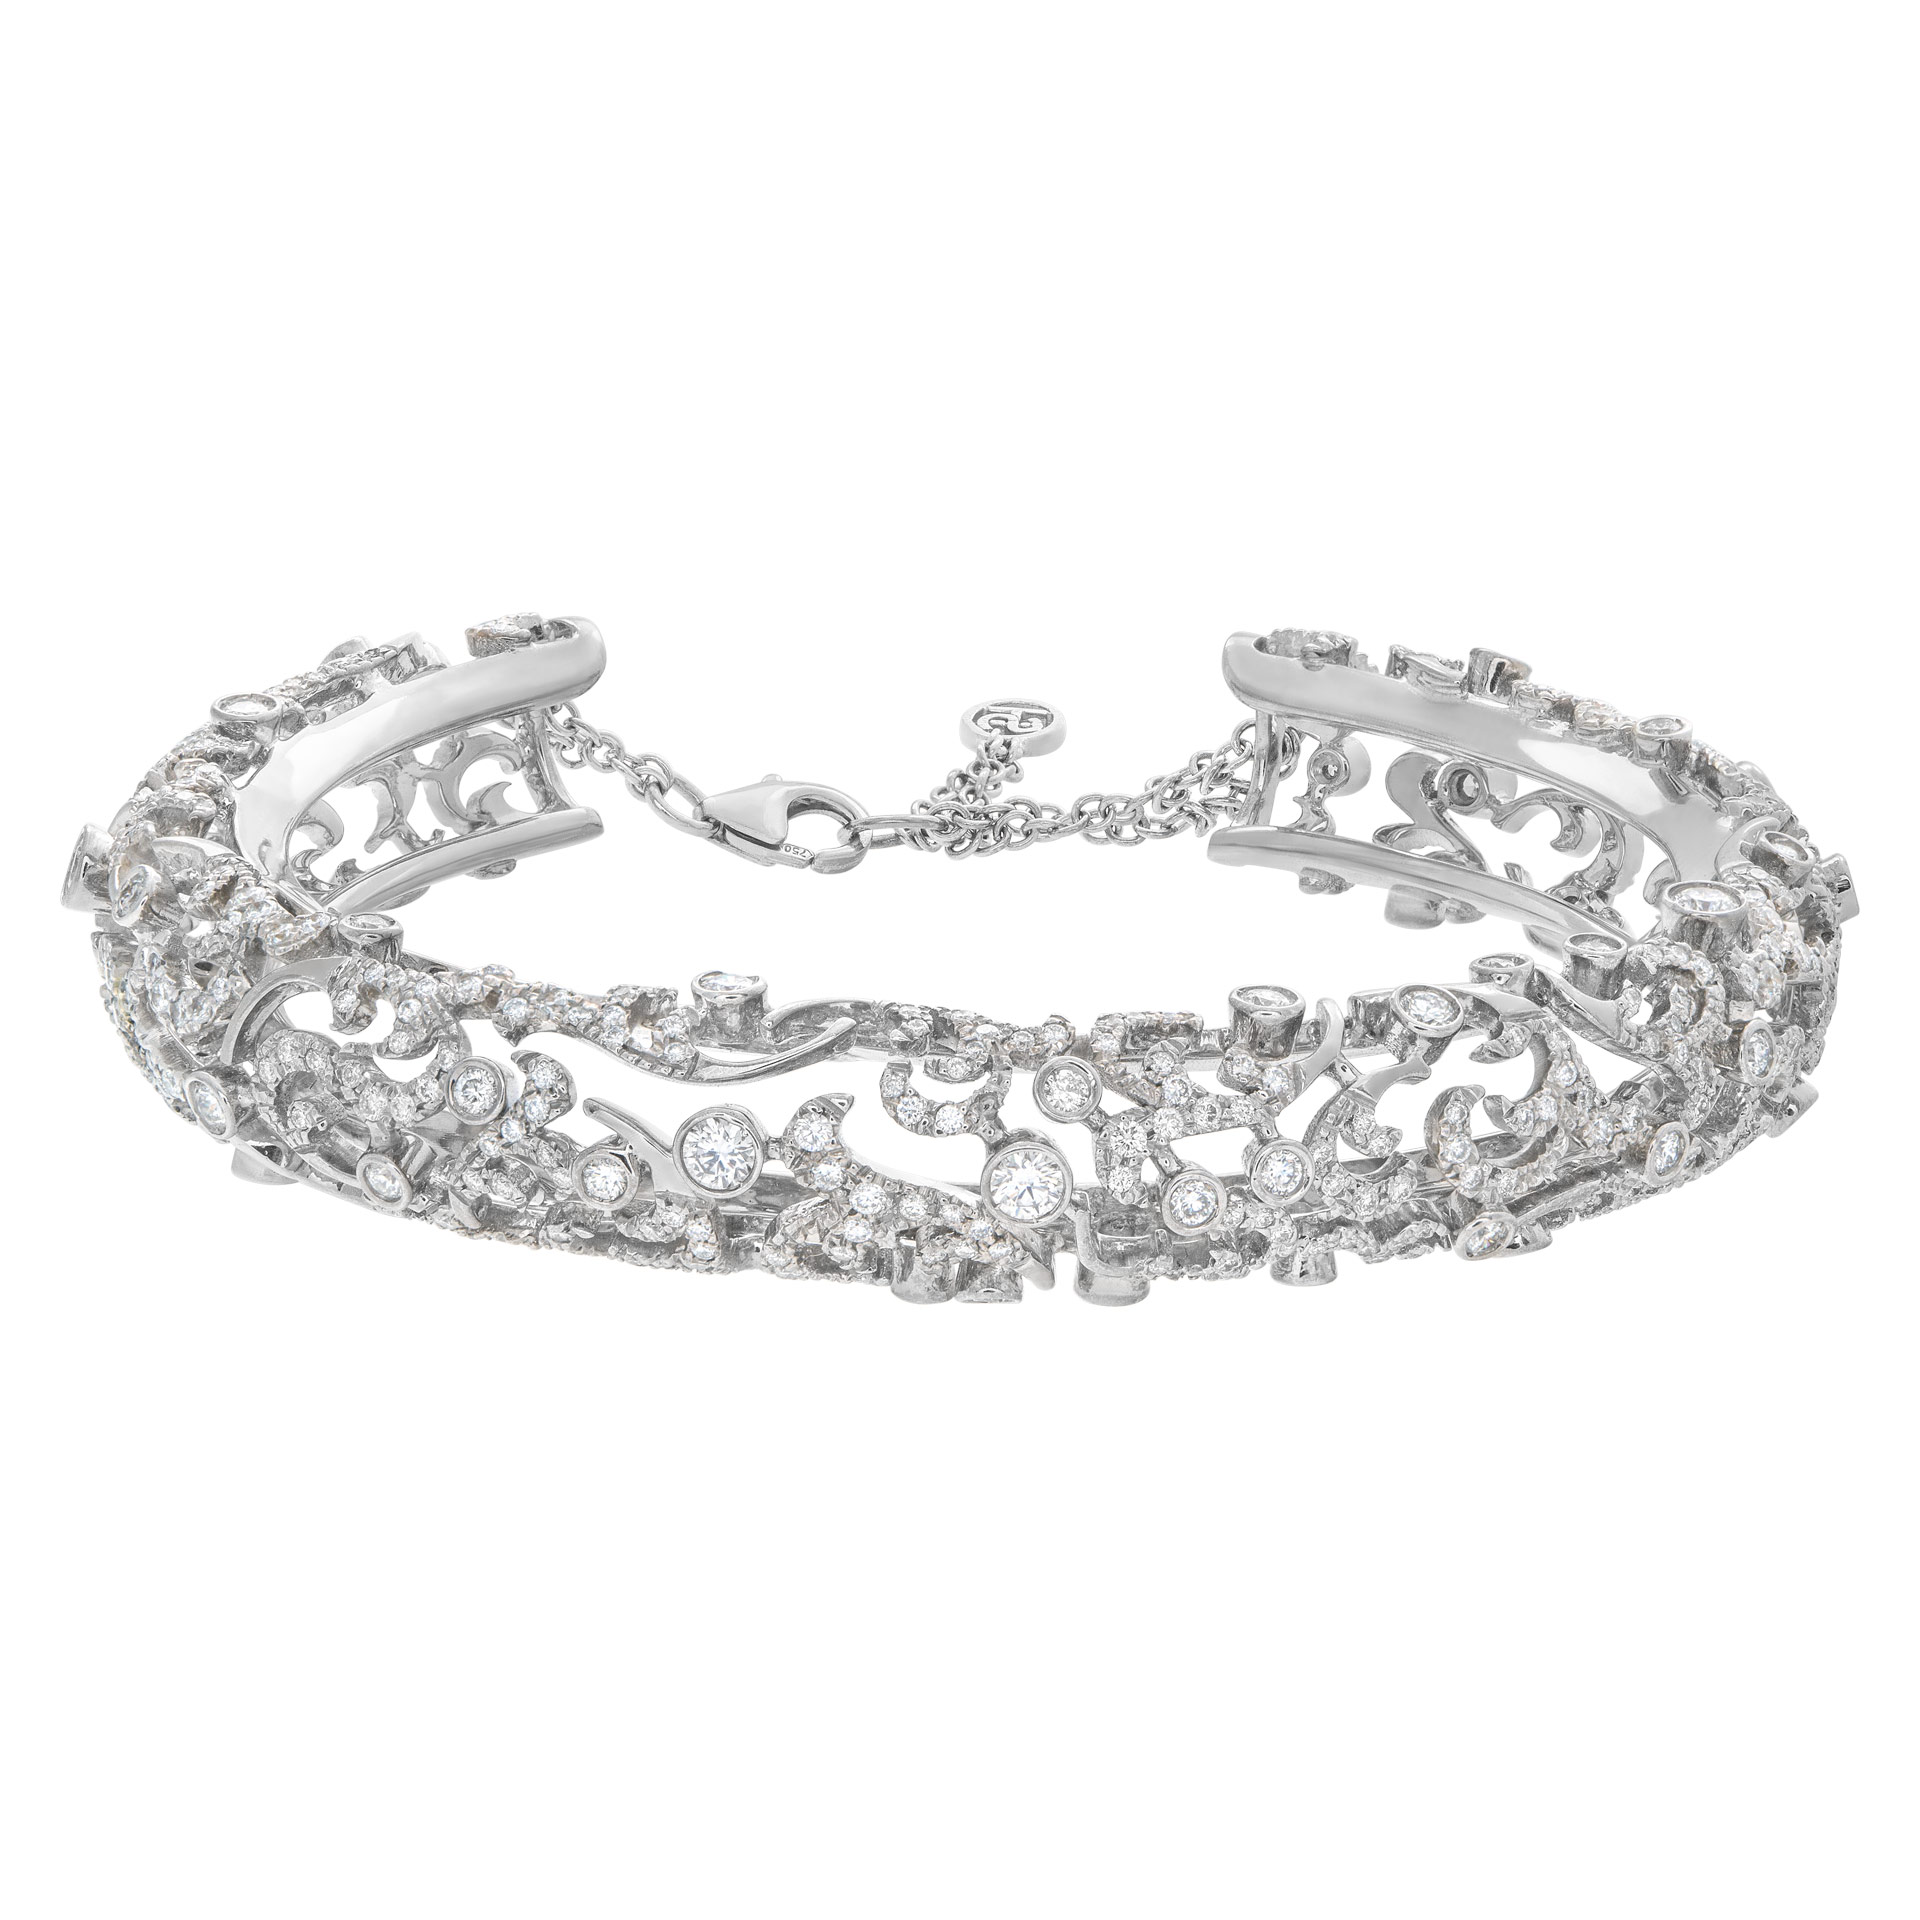 Remarkable diamond bangle in 18k white gold with 4.13 carats in diamonds image 1